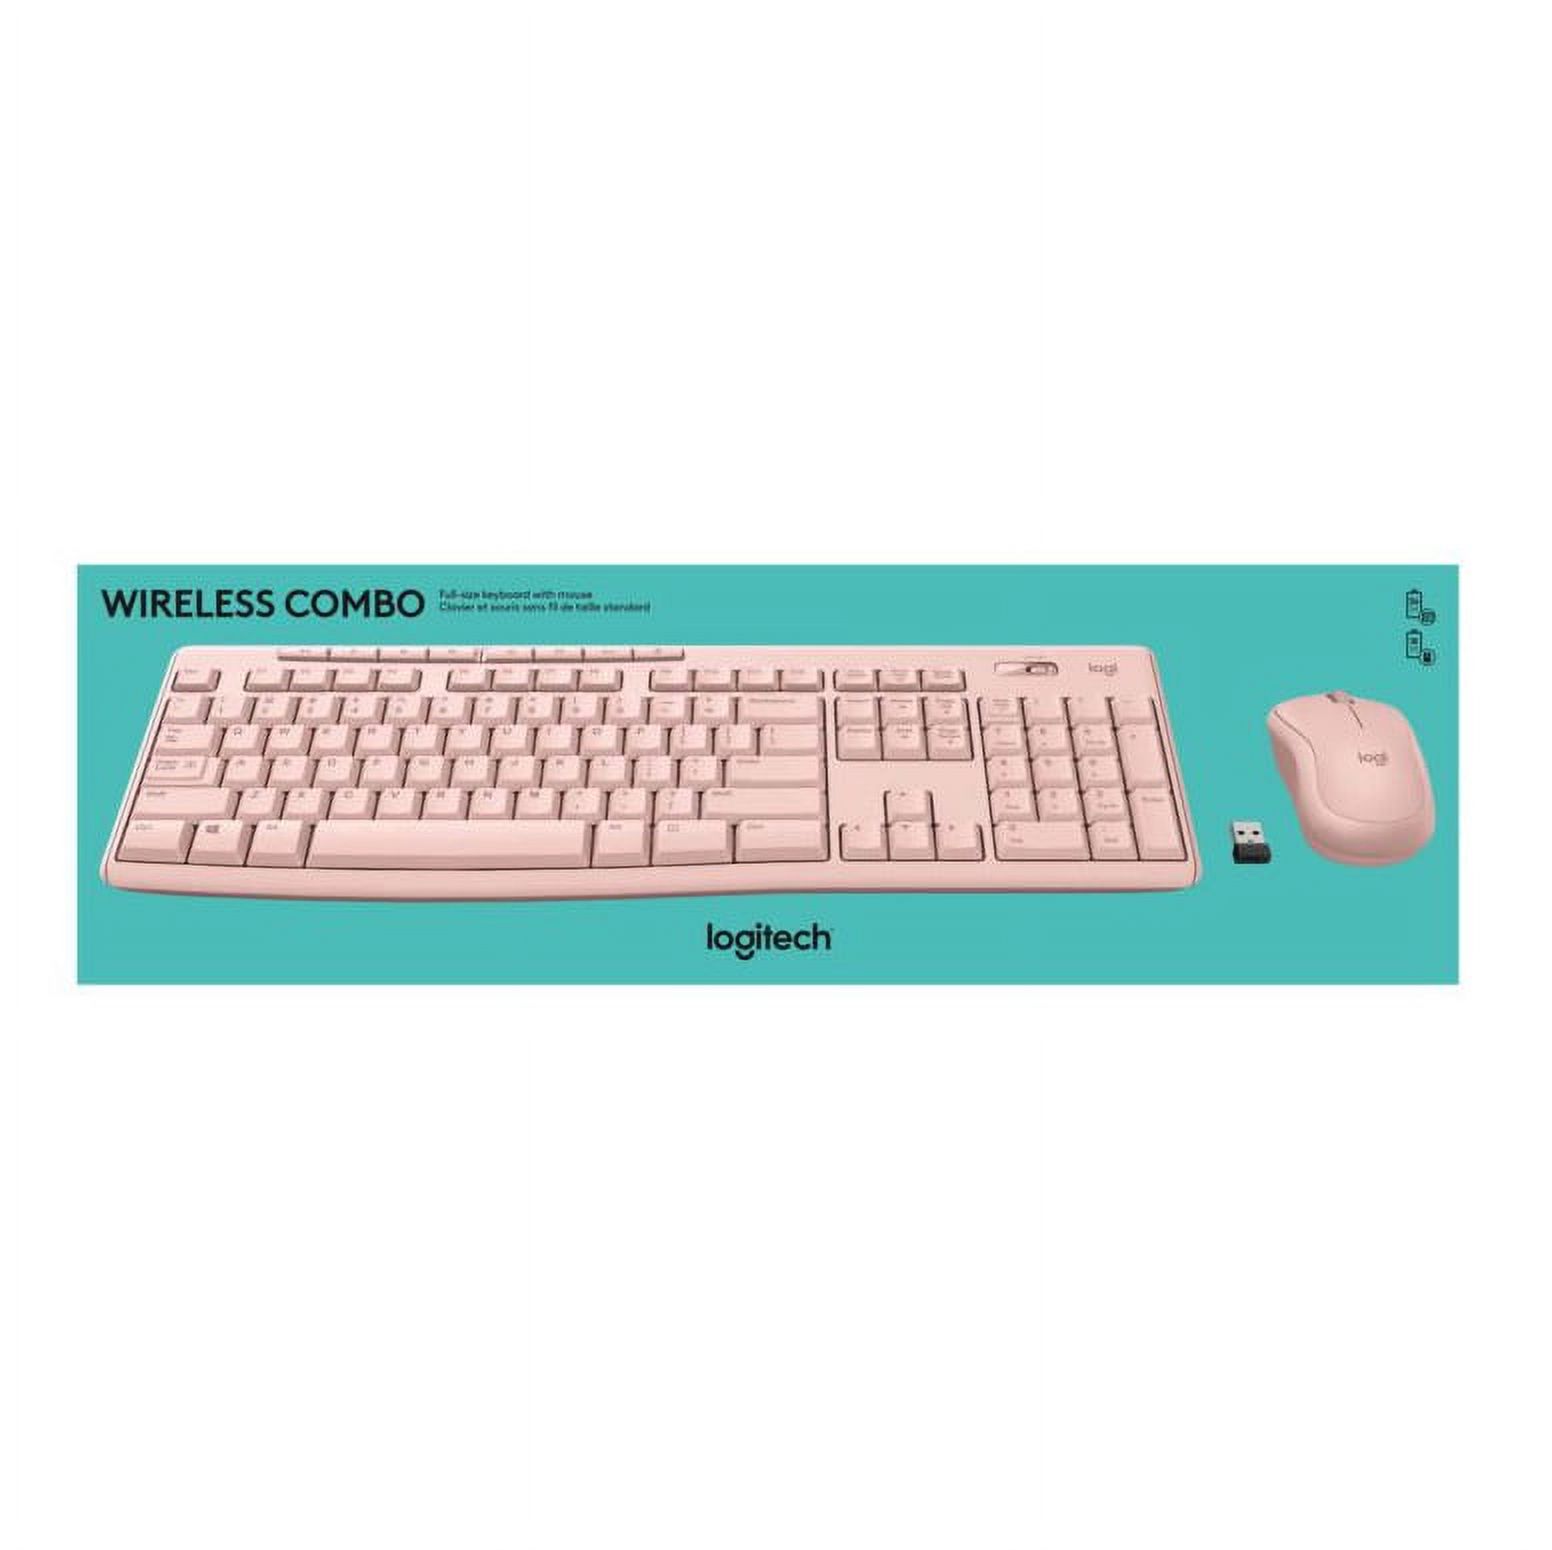 Logitech Wireless Keyboard and Mouse Combo for Windows, 2.4 GHz Wireless, Compact Mouse, Rose - image 2 of 6